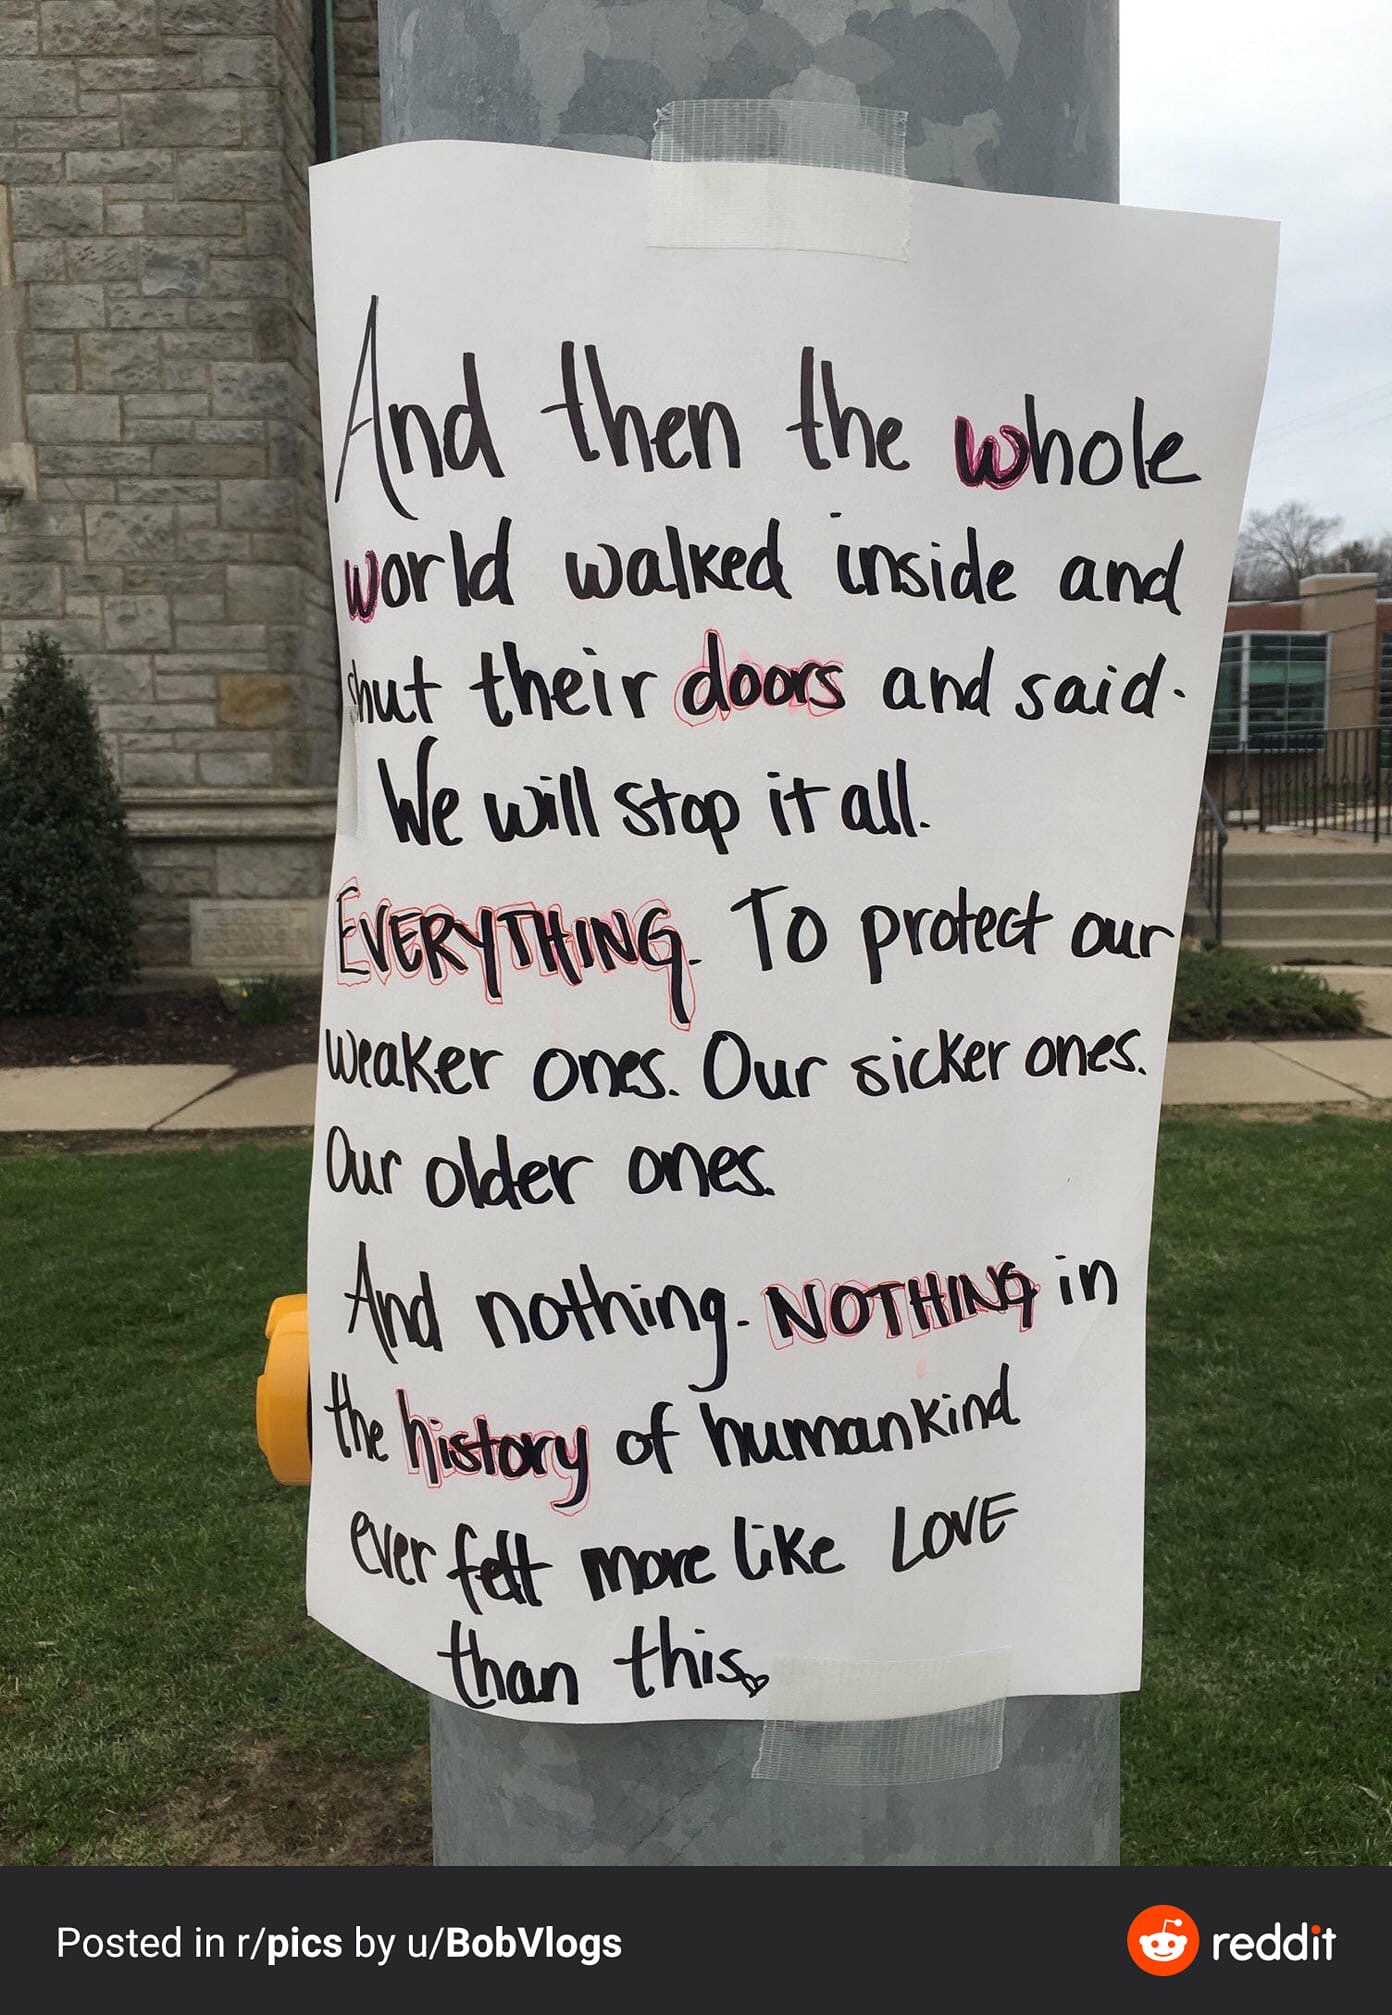 Poster with text: And then the whole world walked inside and shut their doors and said we will stop it all. EVERYTHING. To protect our weaker ones. Our sicker ones. Our older ones. And nothing. NOTHING. In the history of humankind ever felt more like love than this.